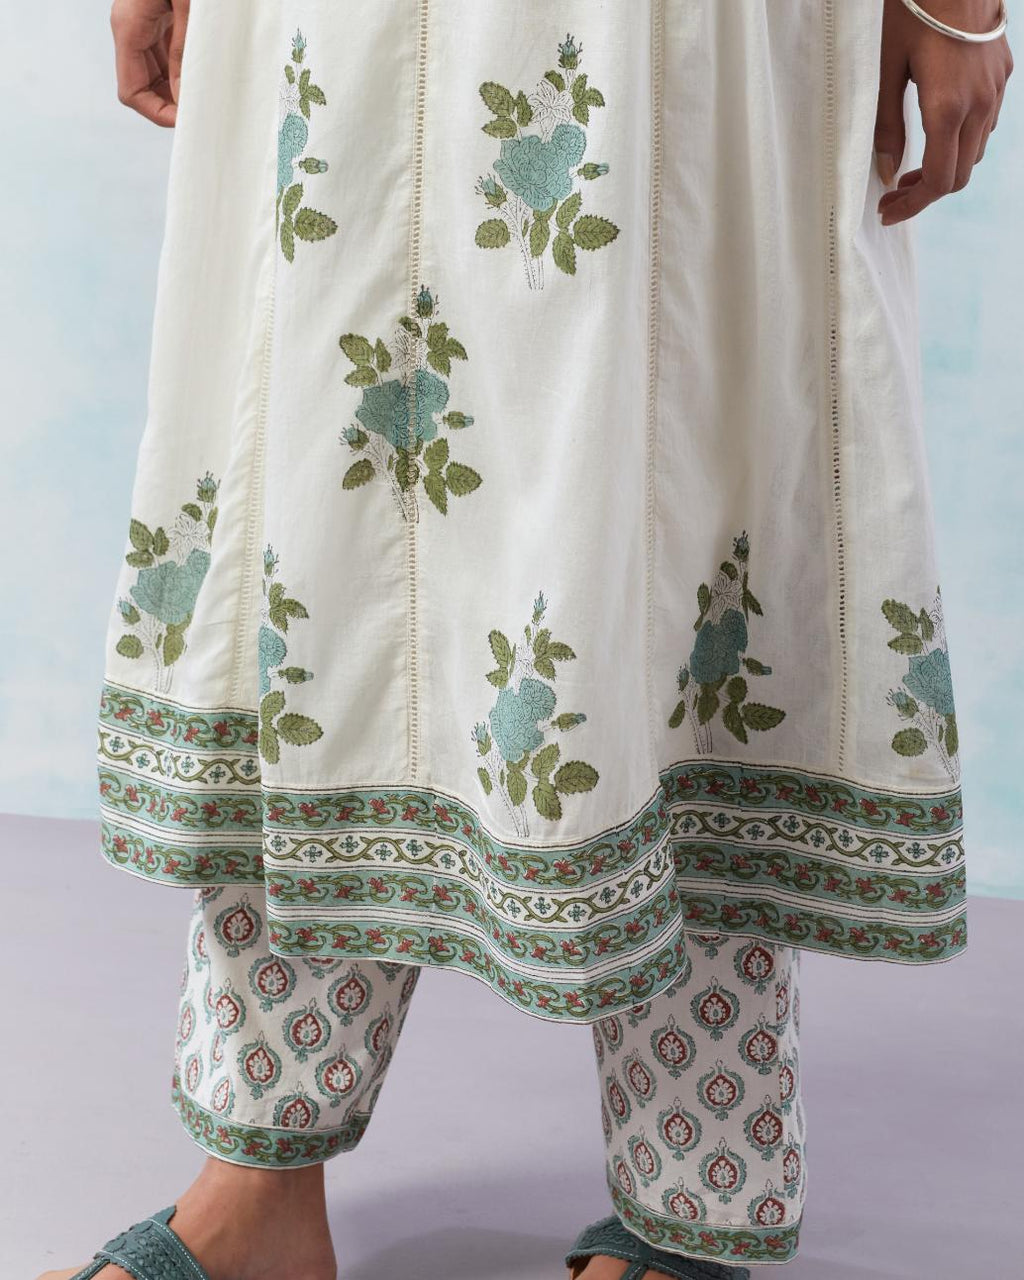 Off white cotton hand block printed A-line kurta set with teal green flower boota and faggoting detailing.